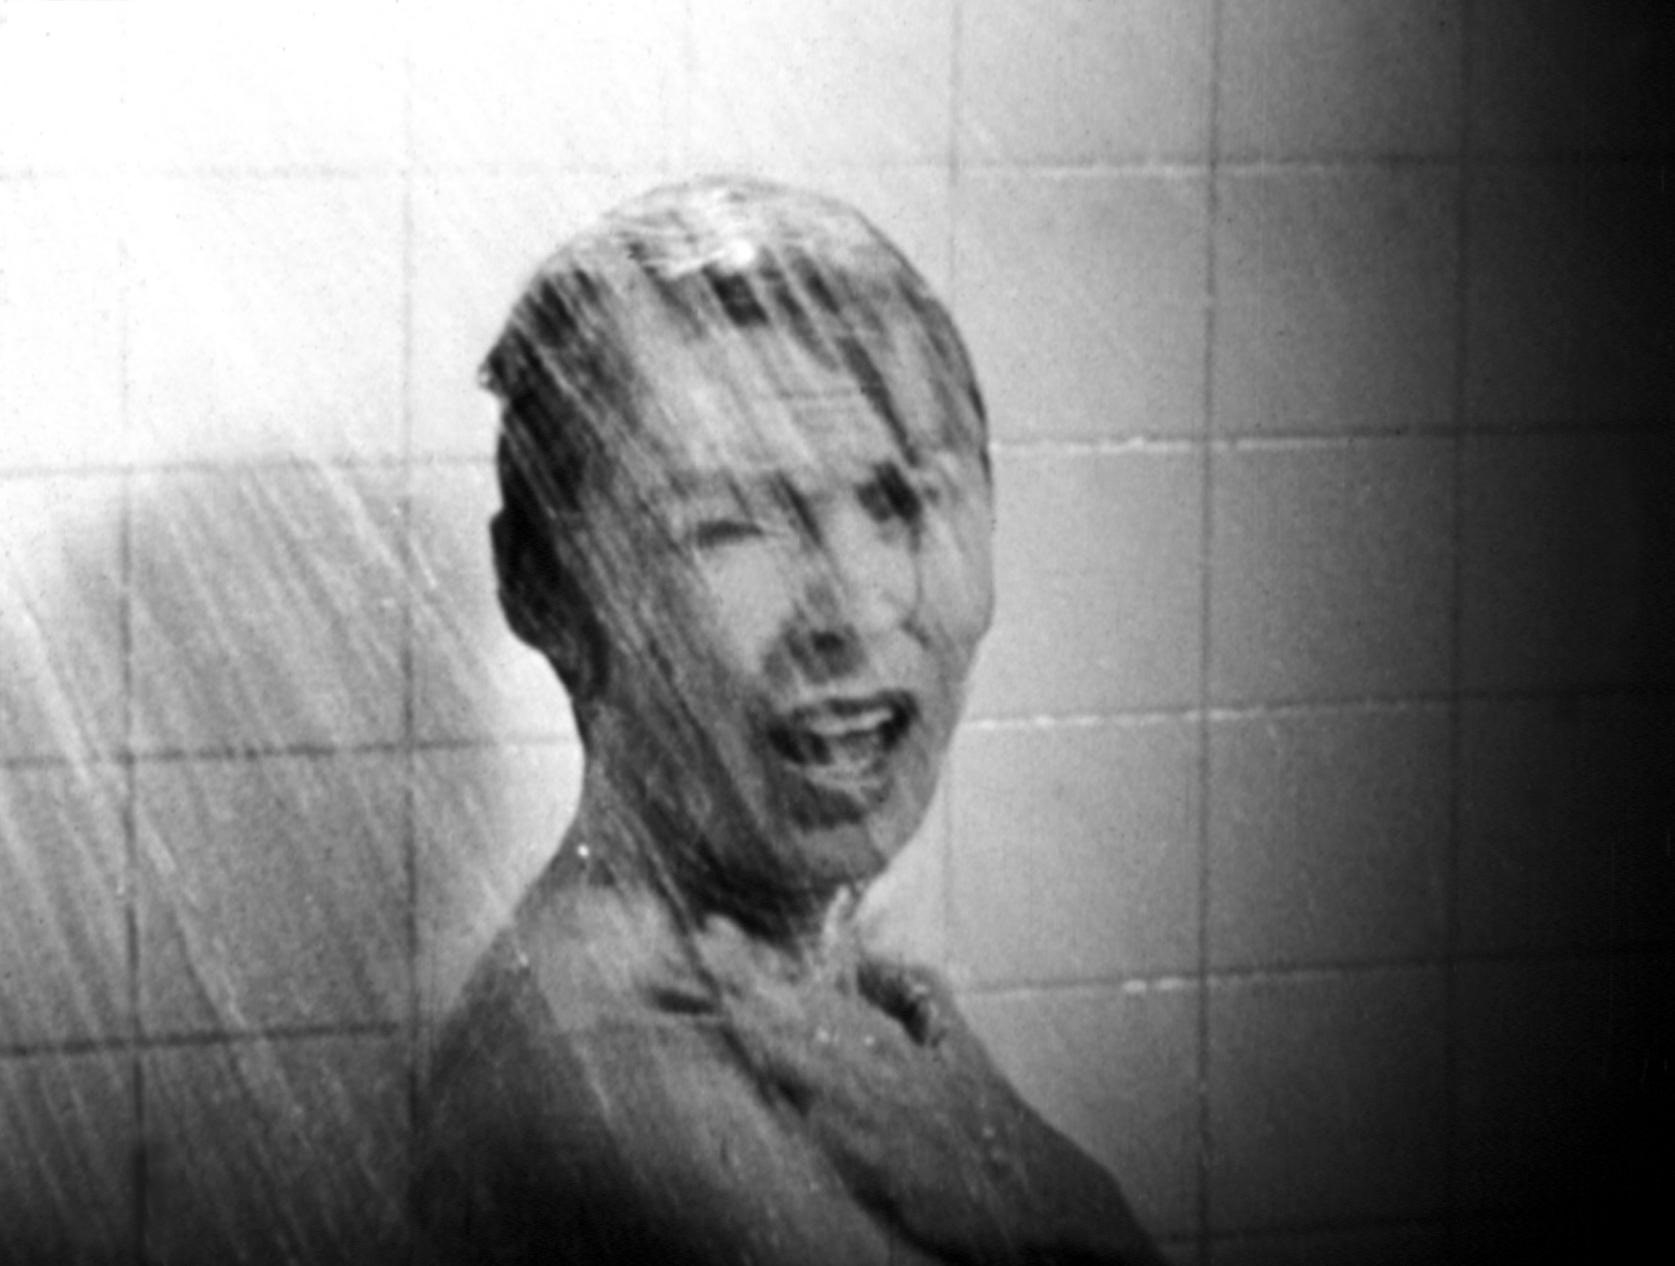 Janet Leigh stands in a shower